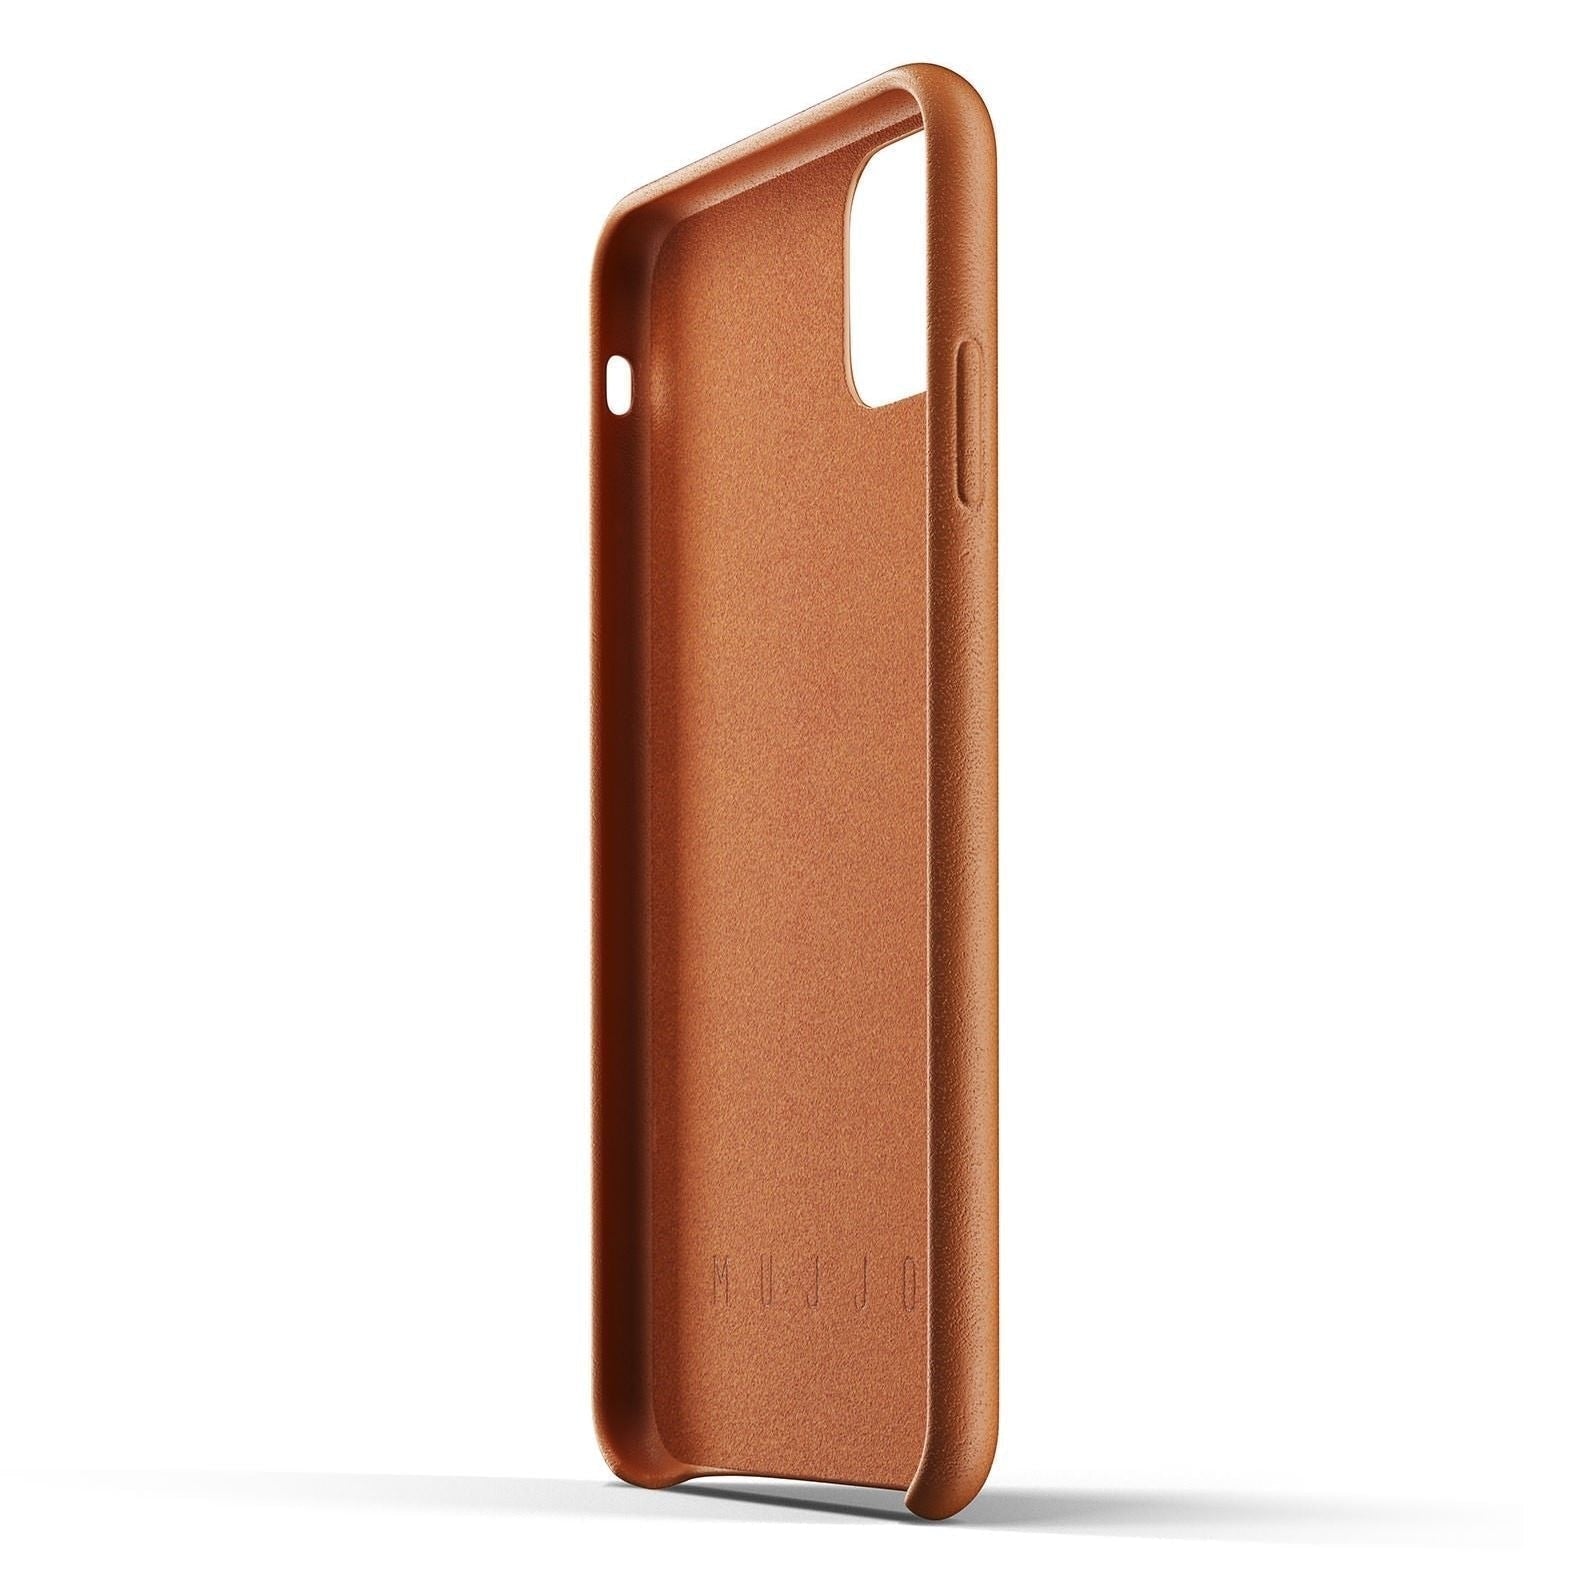 Review: Mujjo Full Leather Wallet Case For iPhone XS Max